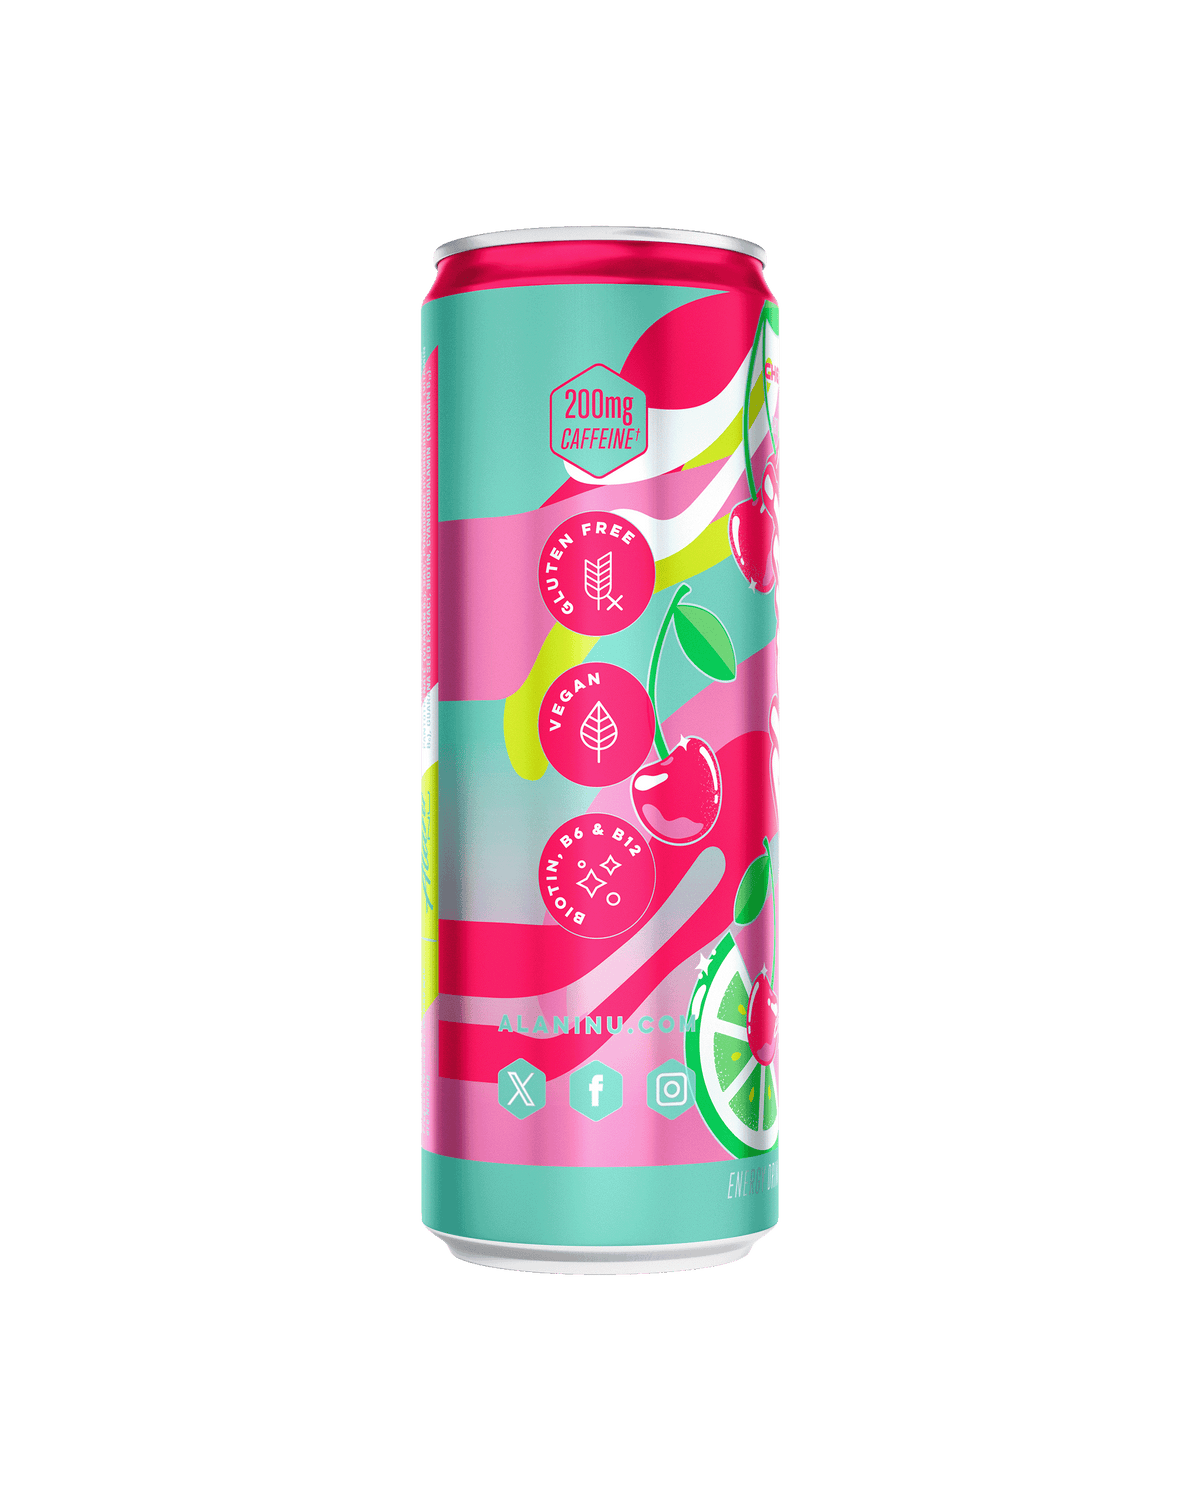 Alani Nu Electric Energy Energy Drink 12-Pack